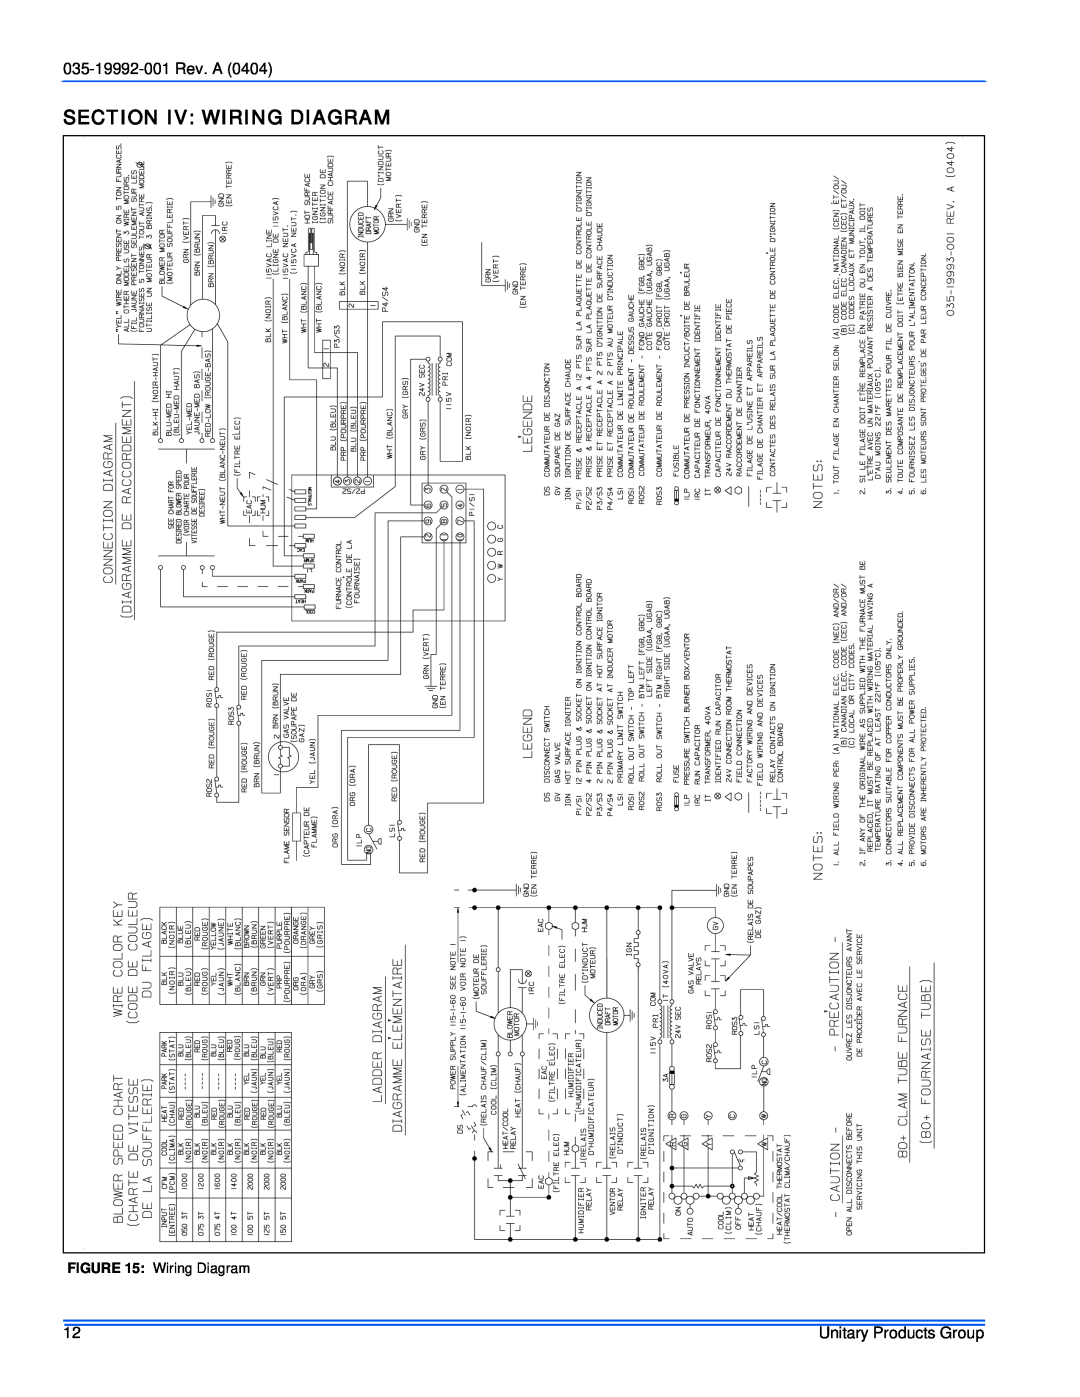 York GF8, G8C service manual Section Iv Wiring Diagram, 035-19992-001Rev. A, Unitary Products Group 